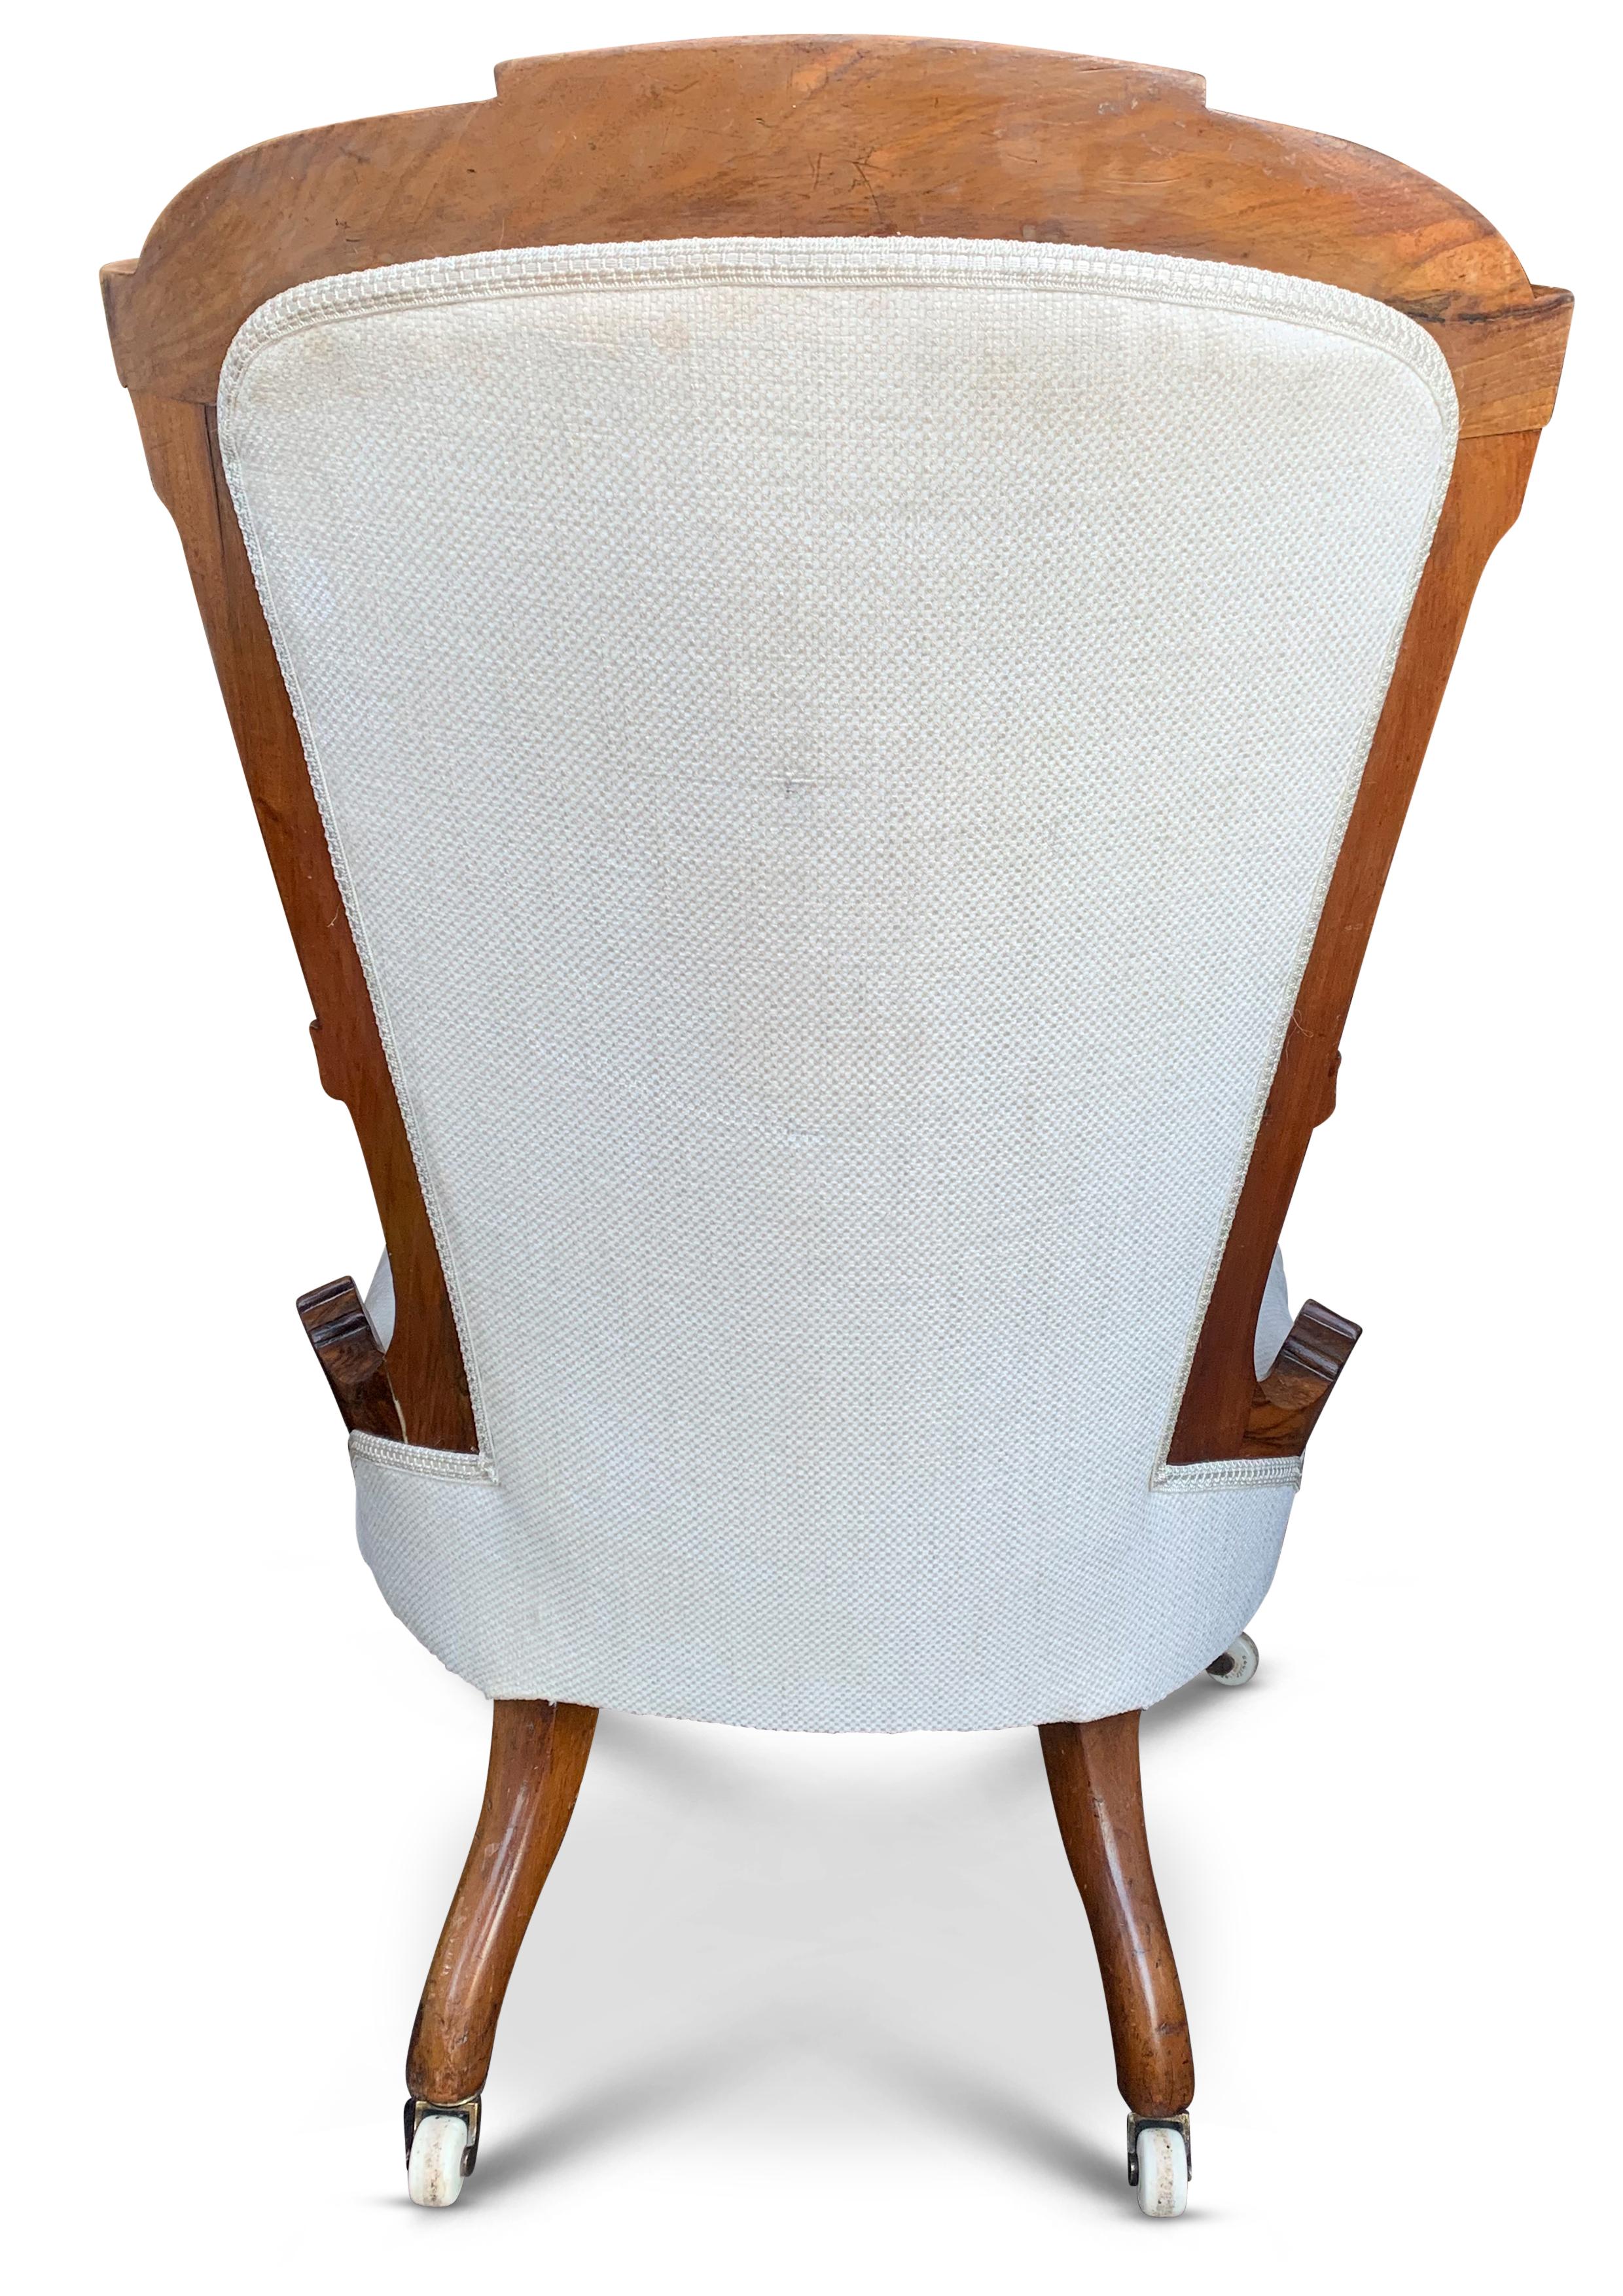 British An Empire Walnut Upholstered Salon Chair With Decorative Inlay & Ceramic Castors For Sale